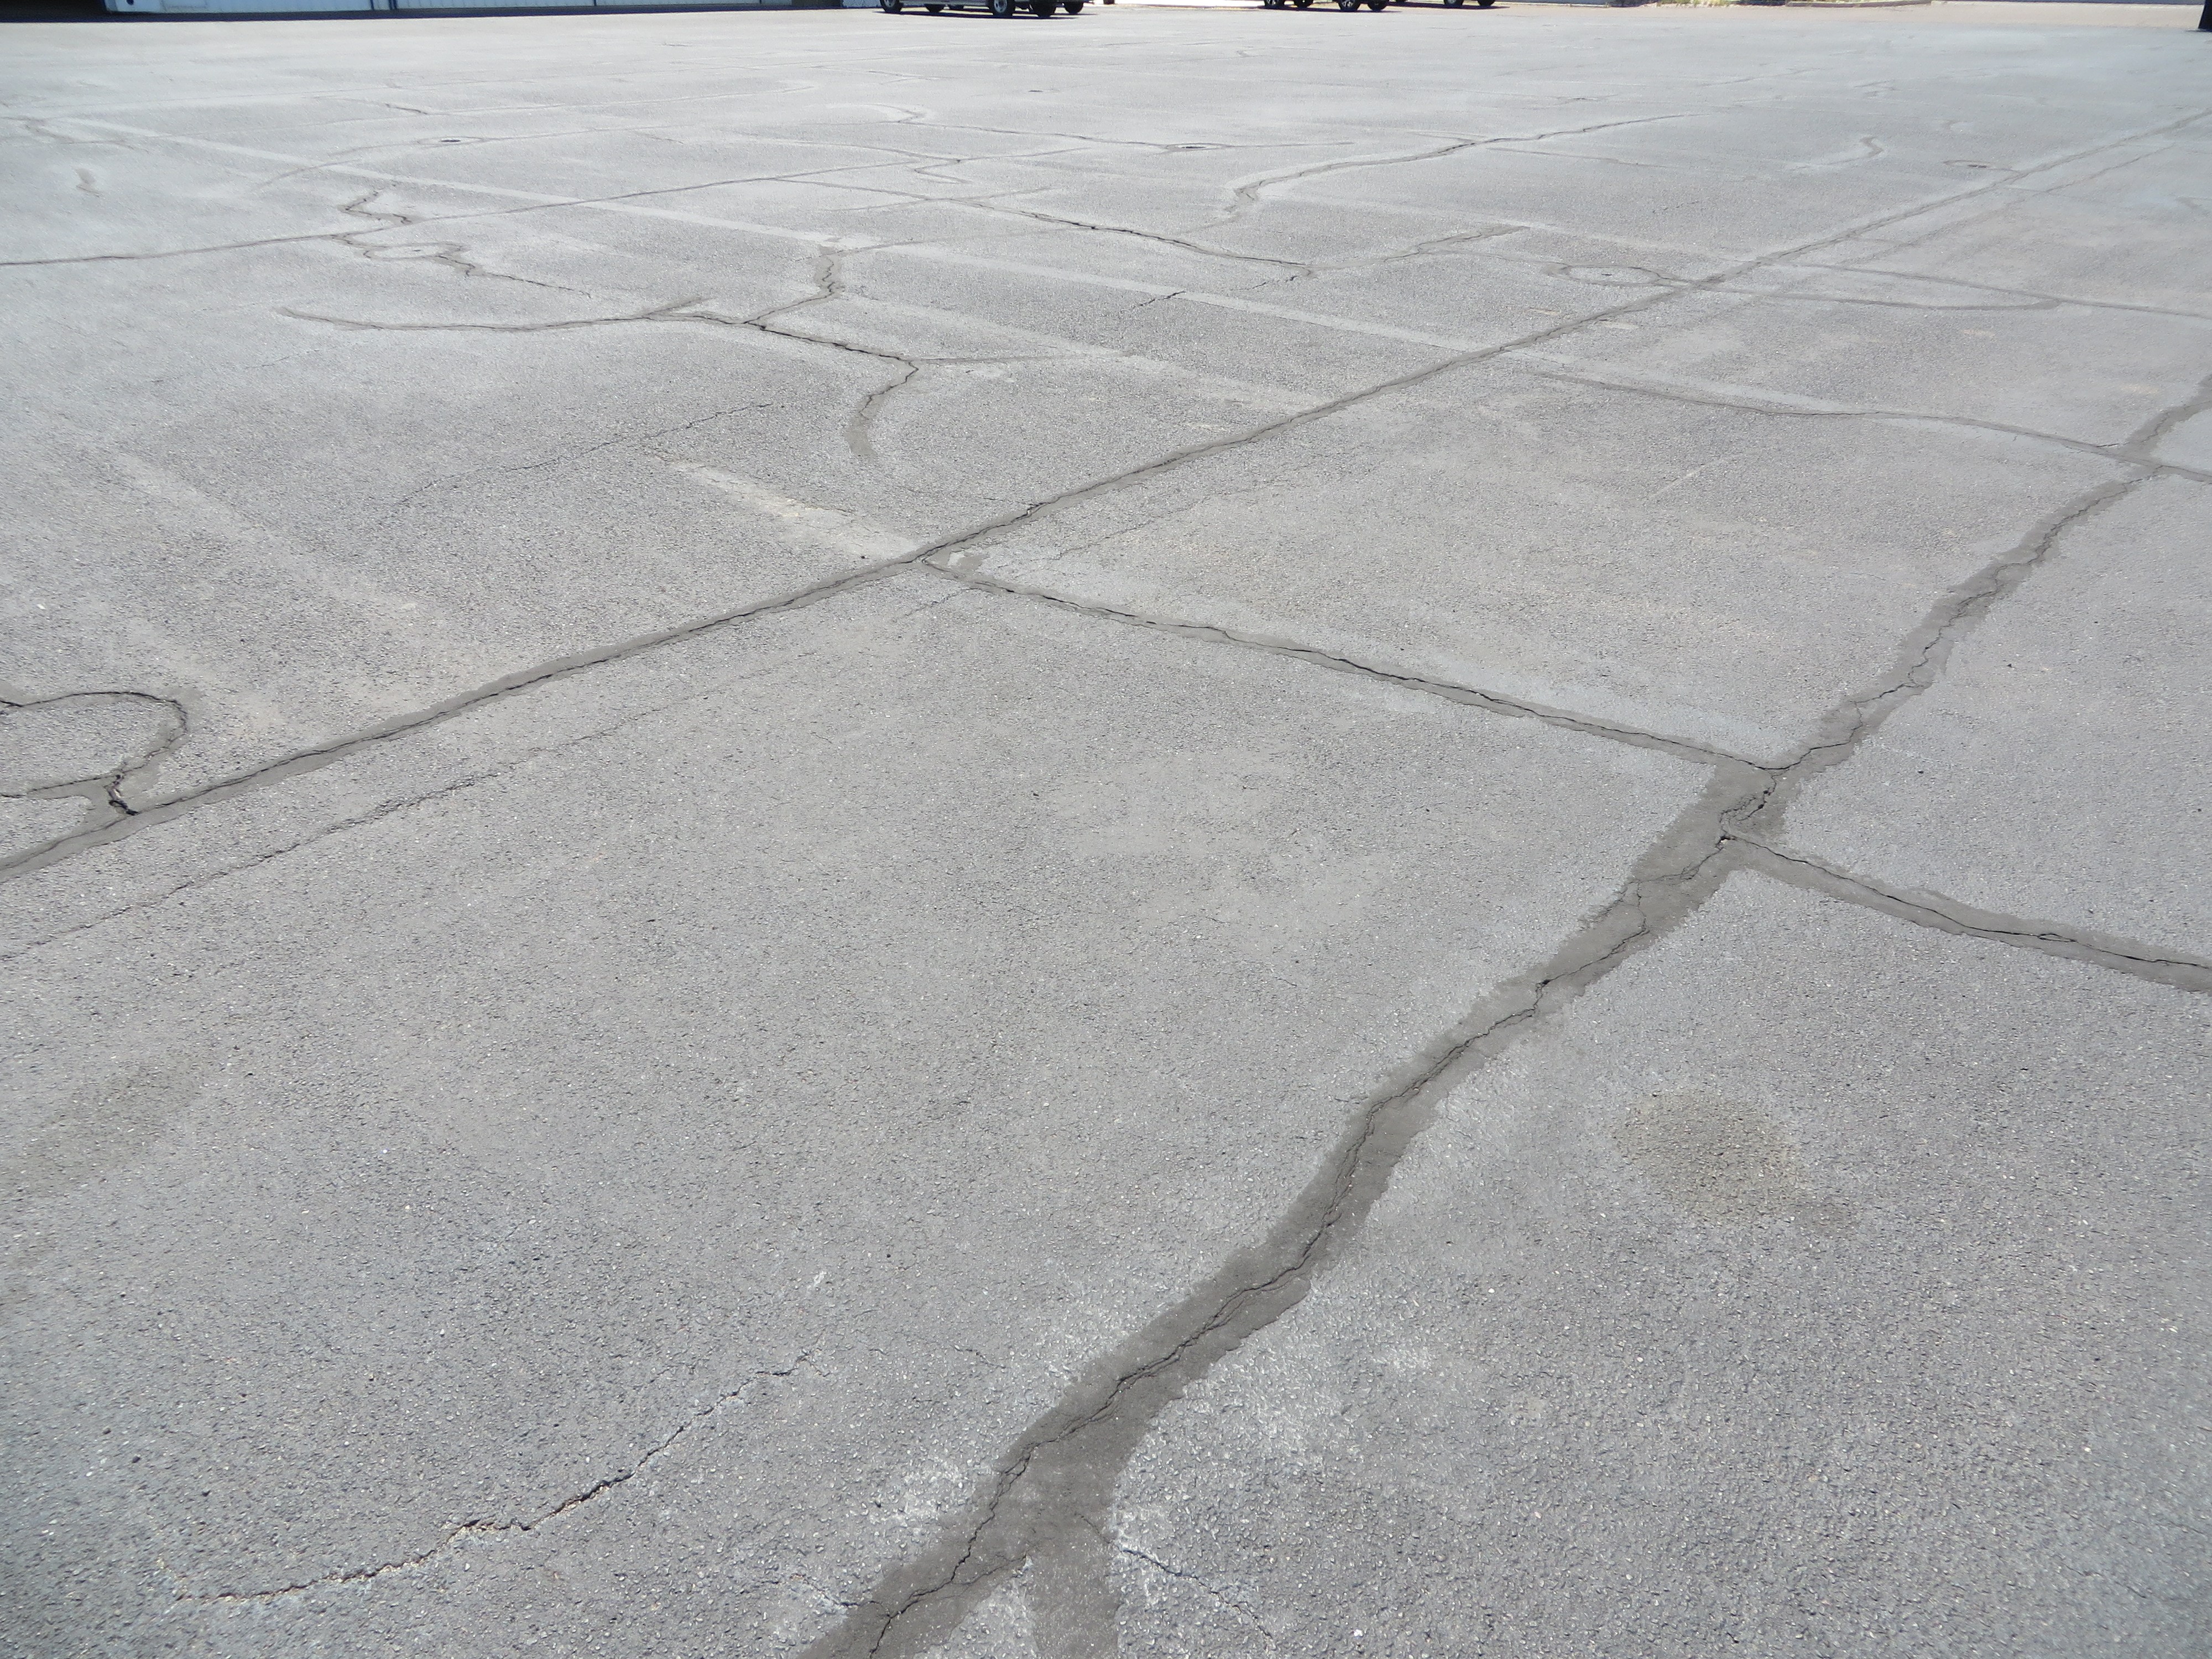 This picture shows an asphalt taxiway pavement with a good amount of block cracking.  The PCI of the pavement in the image is 65.